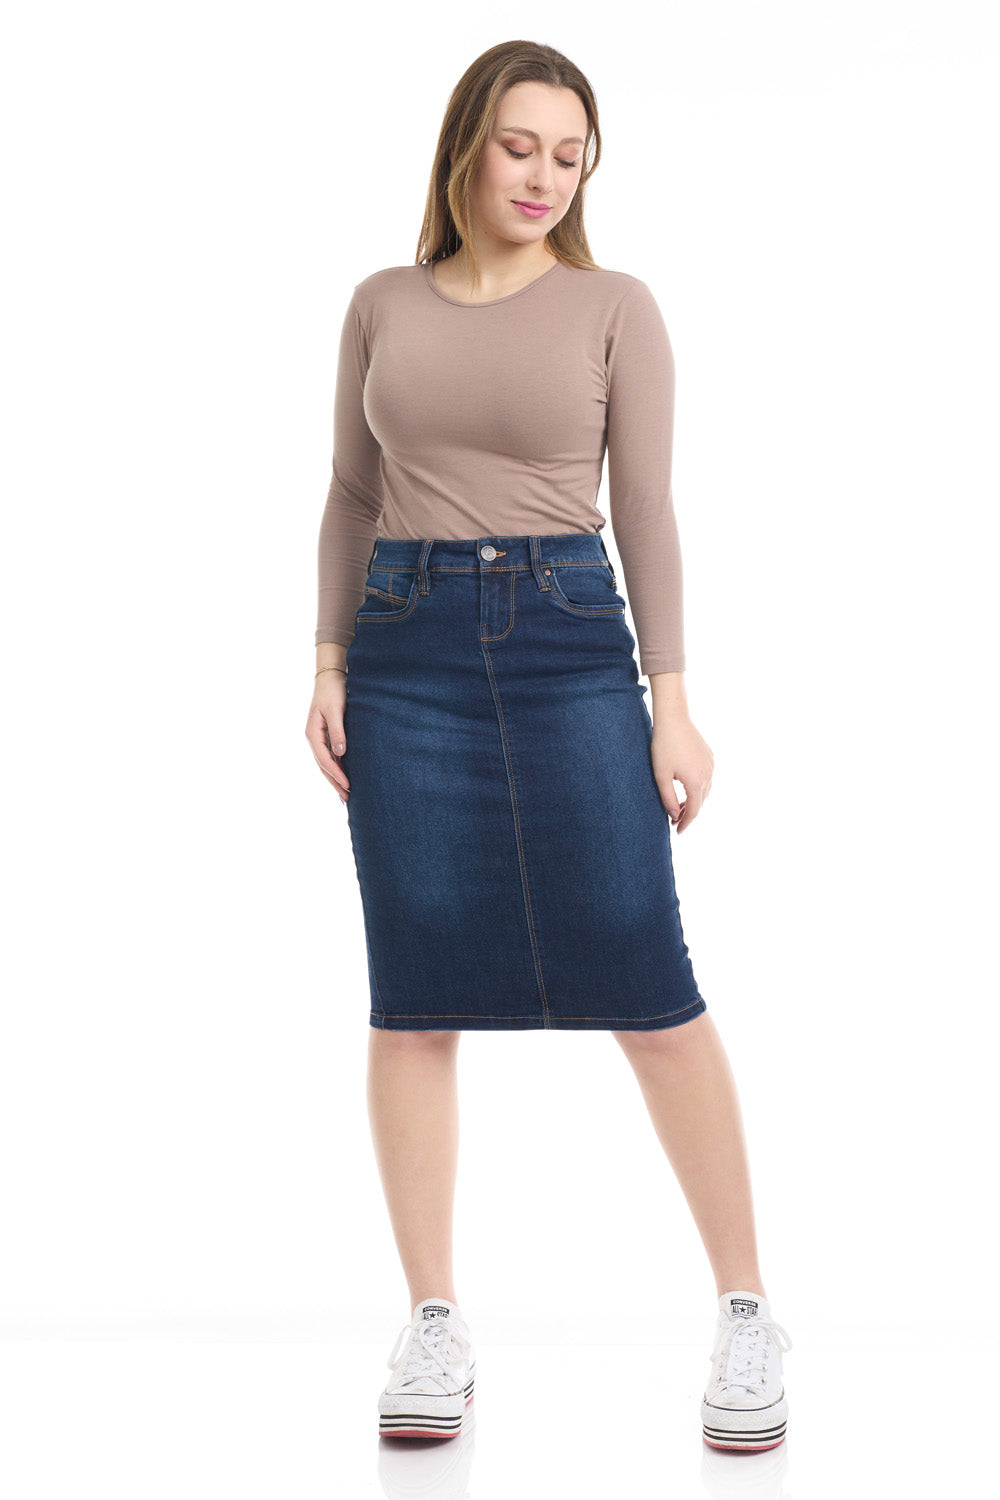 knee length dark blue denim jean skirt, Soft Stretchy with front faux pockets, real back pockets and small slit in the back